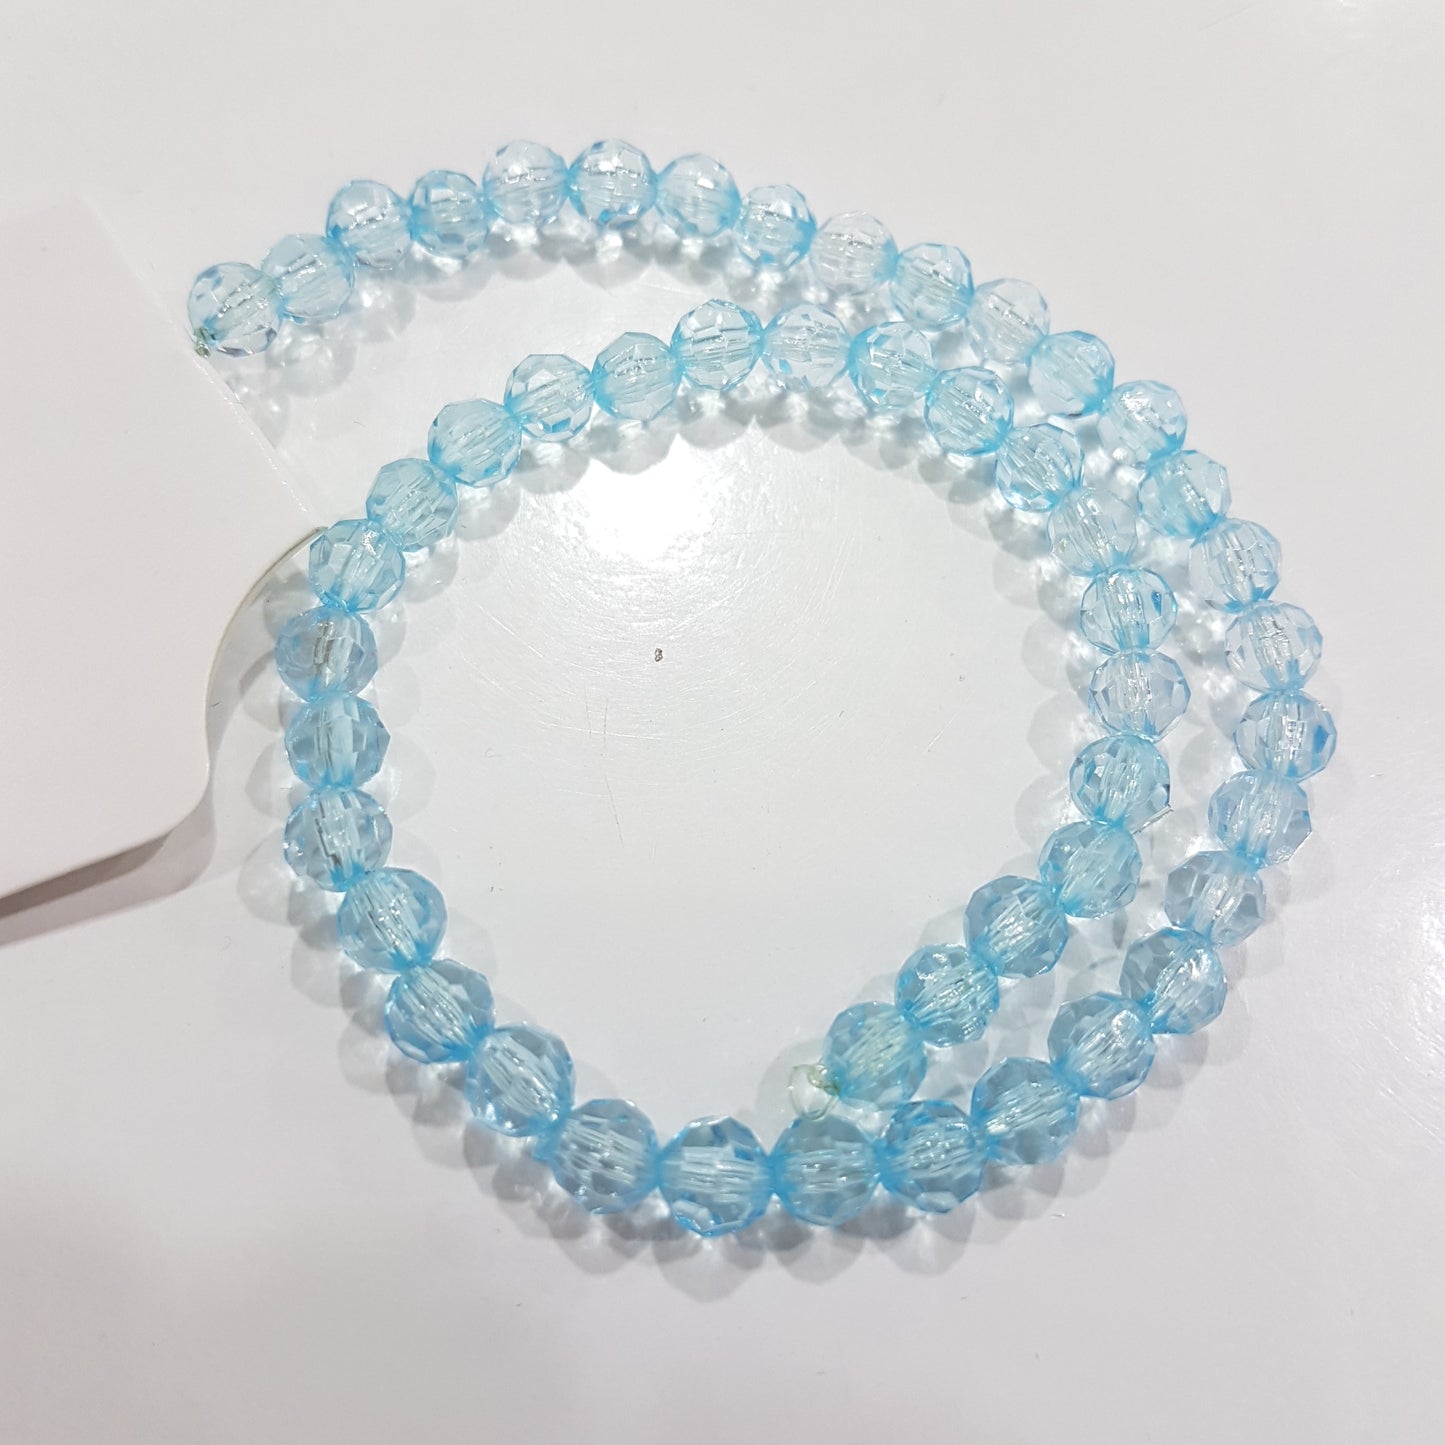 50pc Blue Acrylic Faceted Beads